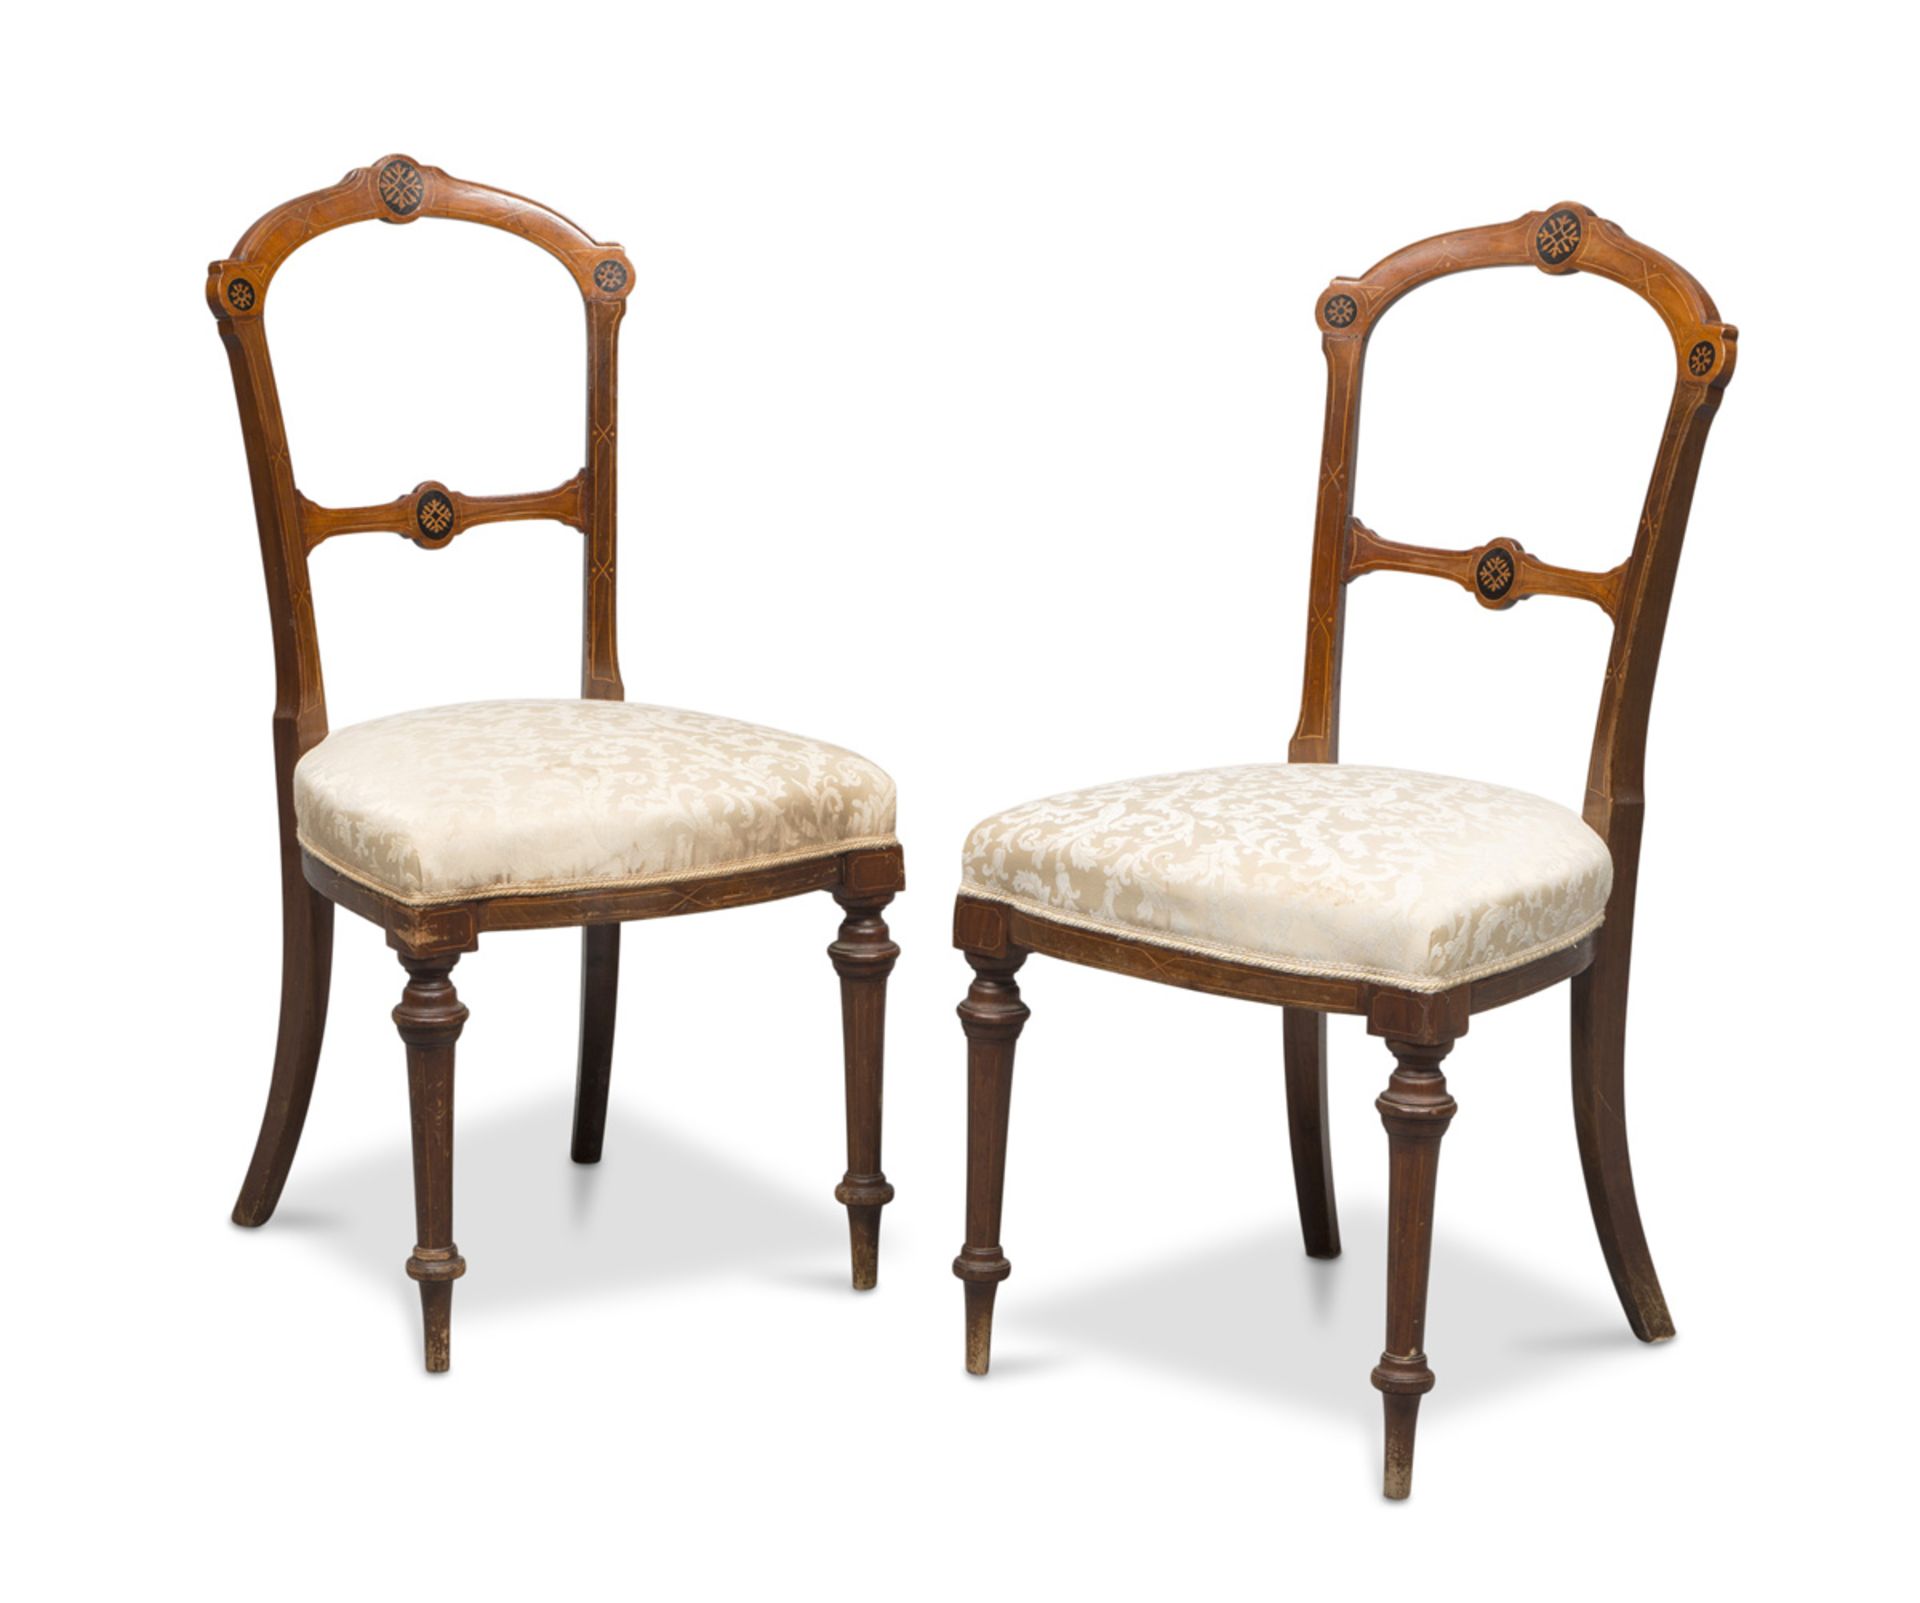 PAIR OF CHAIRS IN MAHOGANY, ENGLAND LATE 19TH CENTURY with inlays in satin wood and ebony. Conic